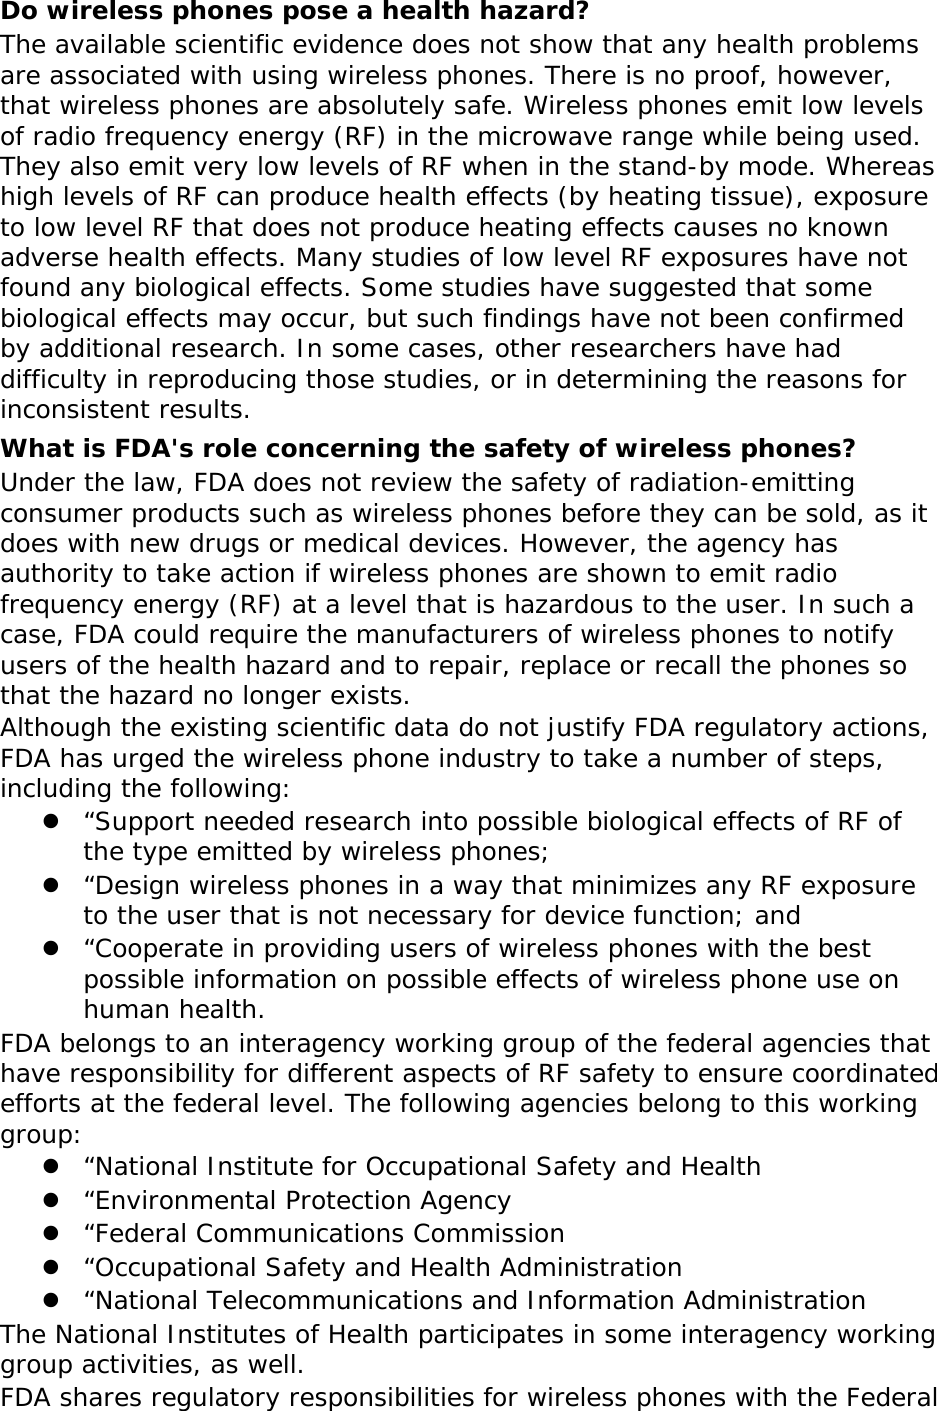  Do wireless phones pose a health hazard? The available scientific evidence does not show that any health problems are associated with using wireless phones. There is no proof, however, that wireless phones are absolutely safe. Wireless phones emit low levels of radio frequency energy (RF) in the microwave range while being used. They also emit very low levels of RF when in the stand-by mode. Whereas high levels of RF can produce health effects (by heating tissue), exposure to low level RF that does not produce heating effects causes no known adverse health effects. Many studies of low level RF exposures have not found any biological effects. Some studies have suggested that some biological effects may occur, but such findings have not been confirmed by additional research. In some cases, other researchers have had difficulty in reproducing those studies, or in determining the reasons for inconsistent results. What is FDA&apos;s role concerning the safety of wireless phones? Under the law, FDA does not review the safety of radiation-emitting consumer products such as wireless phones before they can be sold, as it does with new drugs or medical devices. However, the agency has authority to take action if wireless phones are shown to emit radio frequency energy (RF) at a level that is hazardous to the user. In such a case, FDA could require the manufacturers of wireless phones to notify users of the health hazard and to repair, replace or recall the phones so that the hazard no longer exists. Although the existing scientific data do not justify FDA regulatory actions, FDA has urged the wireless phone industry to take a number of steps, including the following: z “Support needed research into possible biological effects of RF of the type emitted by wireless phones; z “Design wireless phones in a way that minimizes any RF exposure to the user that is not necessary for device function; and z “Cooperate in providing users of wireless phones with the best possible information on possible effects of wireless phone use on human health. FDA belongs to an interagency working group of the federal agencies that have responsibility for different aspects of RF safety to ensure coordinated efforts at the federal level. The following agencies belong to this working group: z “National Institute for Occupational Safety and Health z “Environmental Protection Agency z “Federal Communications Commission z “Occupational Safety and Health Administration z “National Telecommunications and Information Administration The National Institutes of Health participates in some interagency working group activities, as well. FDA shares regulatory responsibilities for wireless phones with the Federal  